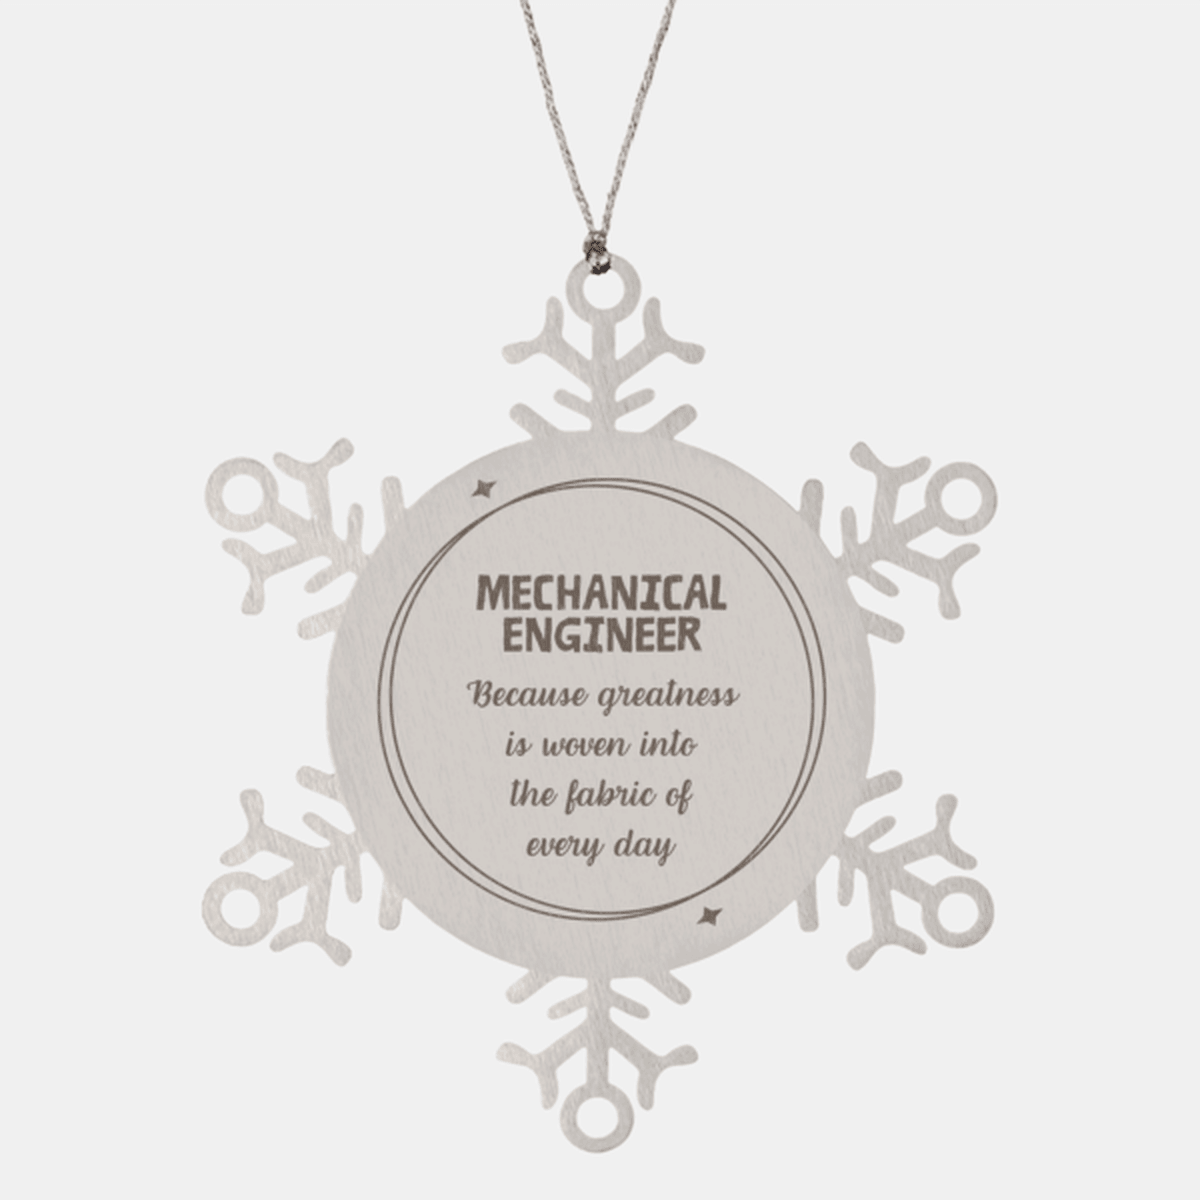 Sarcastic Mechanical Engineer Snowflake Ornament Gifts, Christmas Holiday Gifts for Mechanical Engineer Ornament, Mechanical Engineer: Because greatness is woven into the fabric of every day, Coworkers, Friends - Mallard Moon Gift Shop